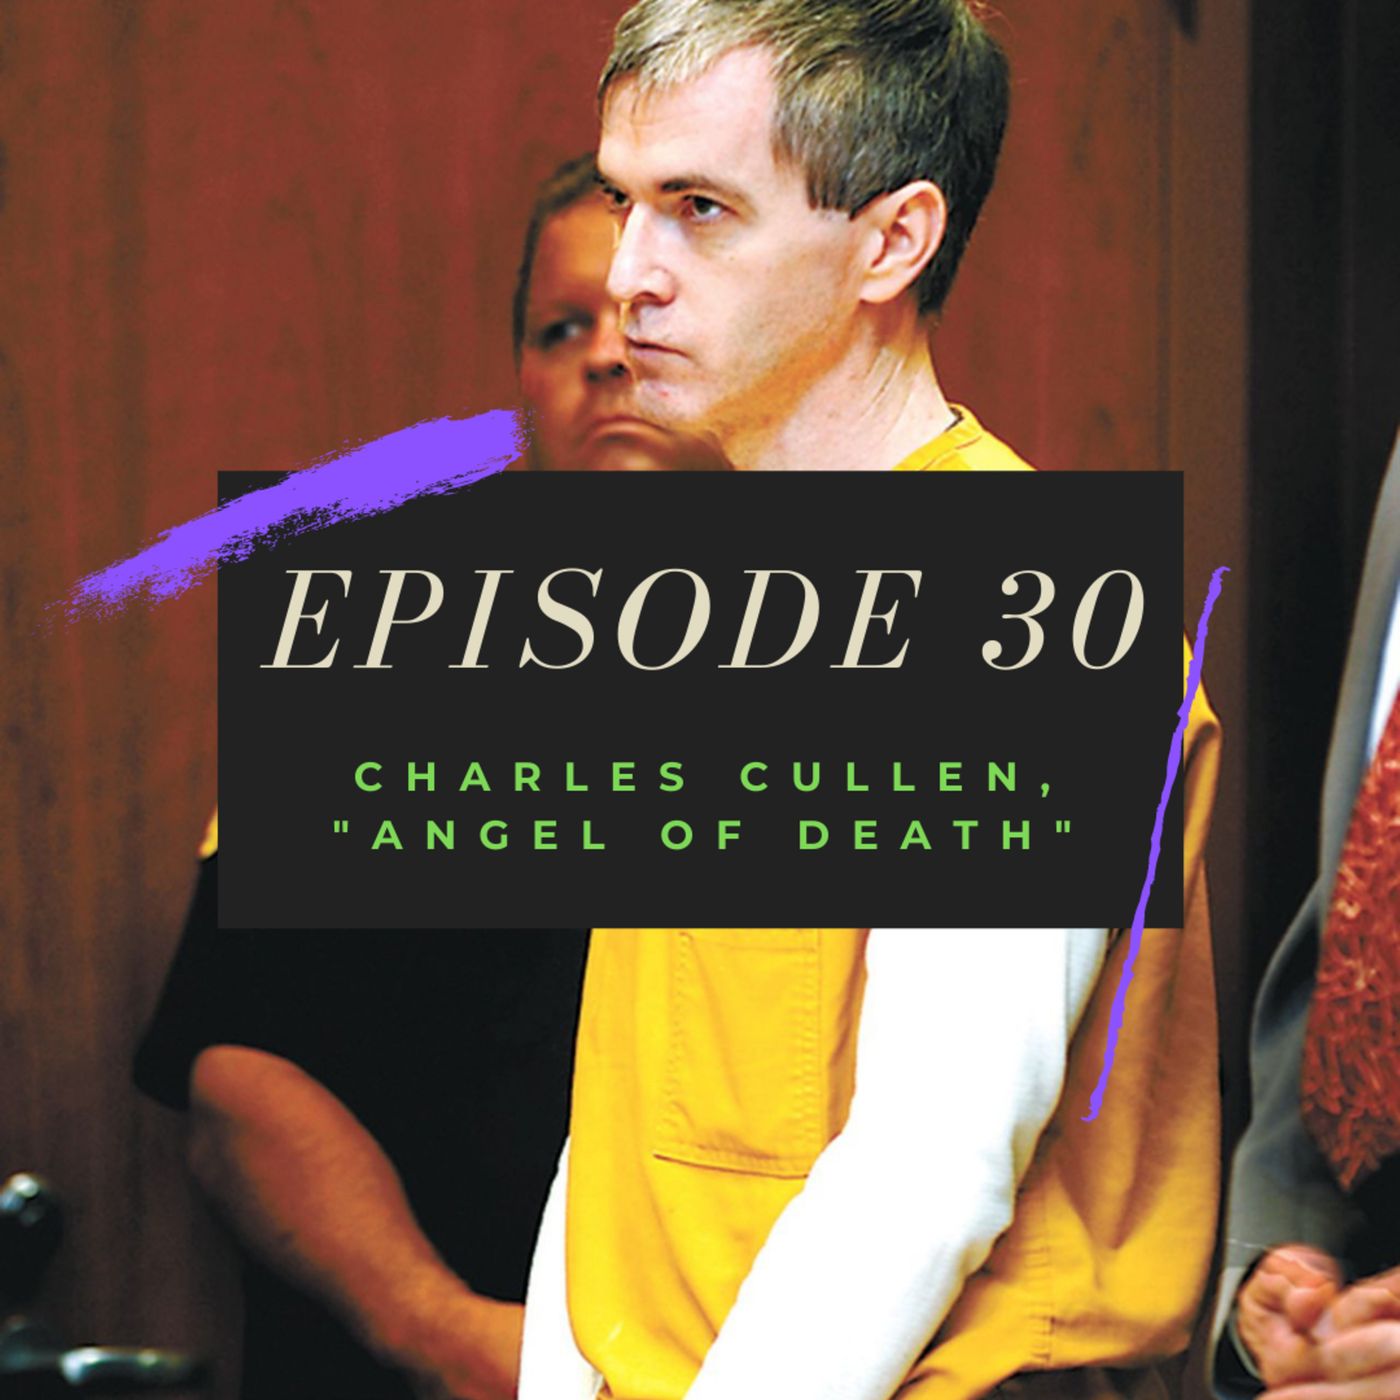 Ep. 30: Charles Cullen, "Angel of Death" Image